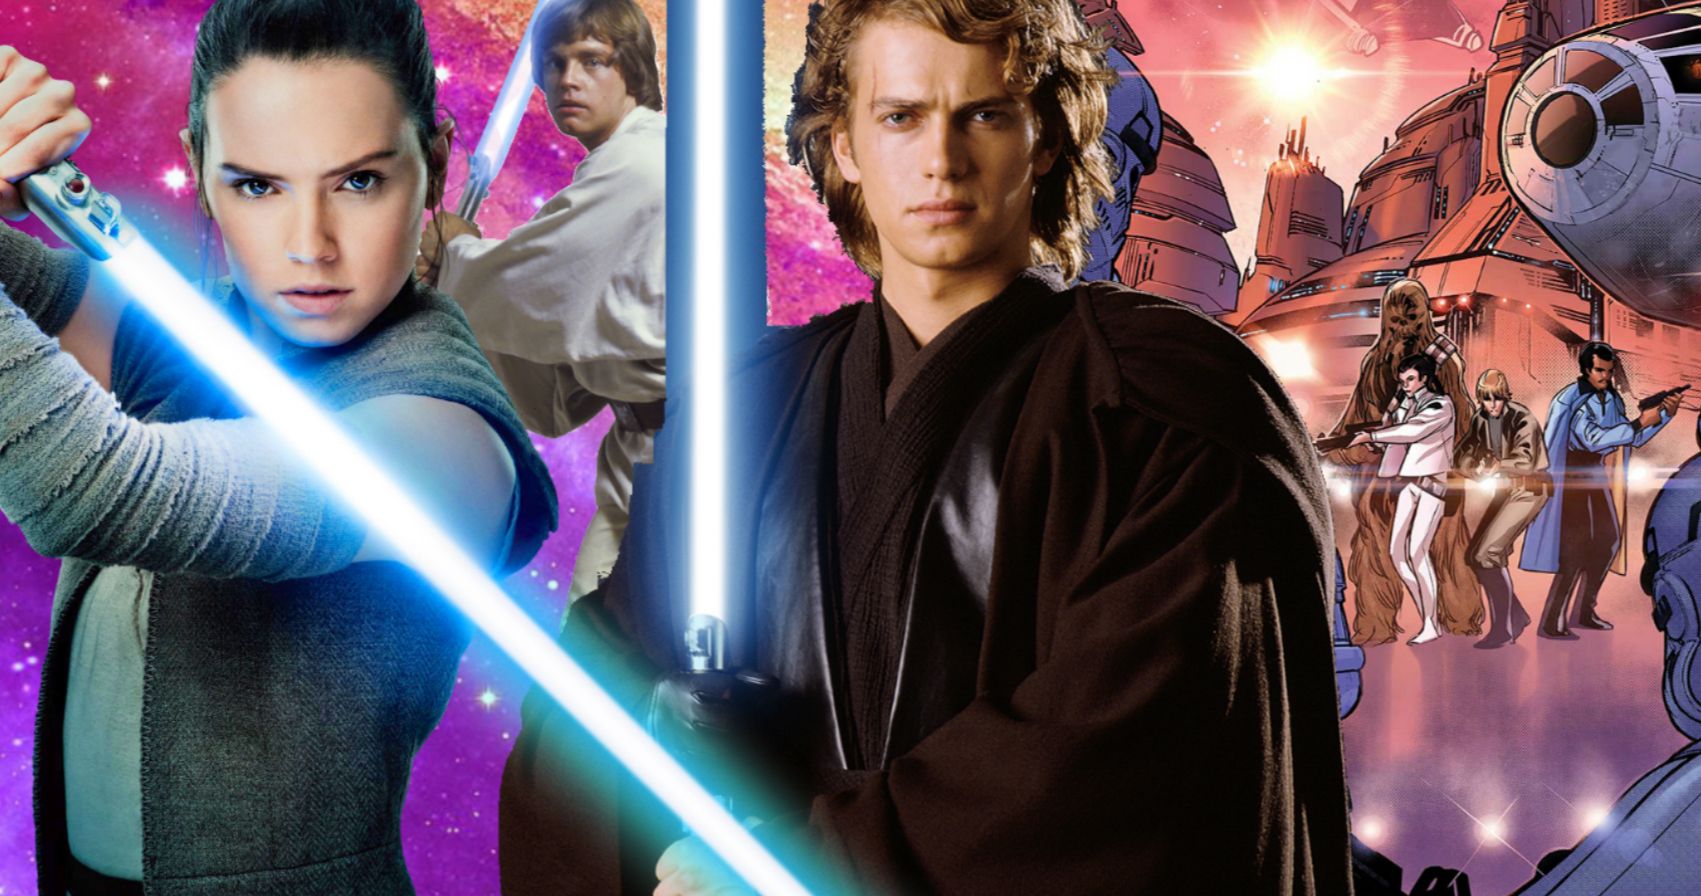 Skywalker Lightsaber Mystery to Be Answered in New Star Wars Comic